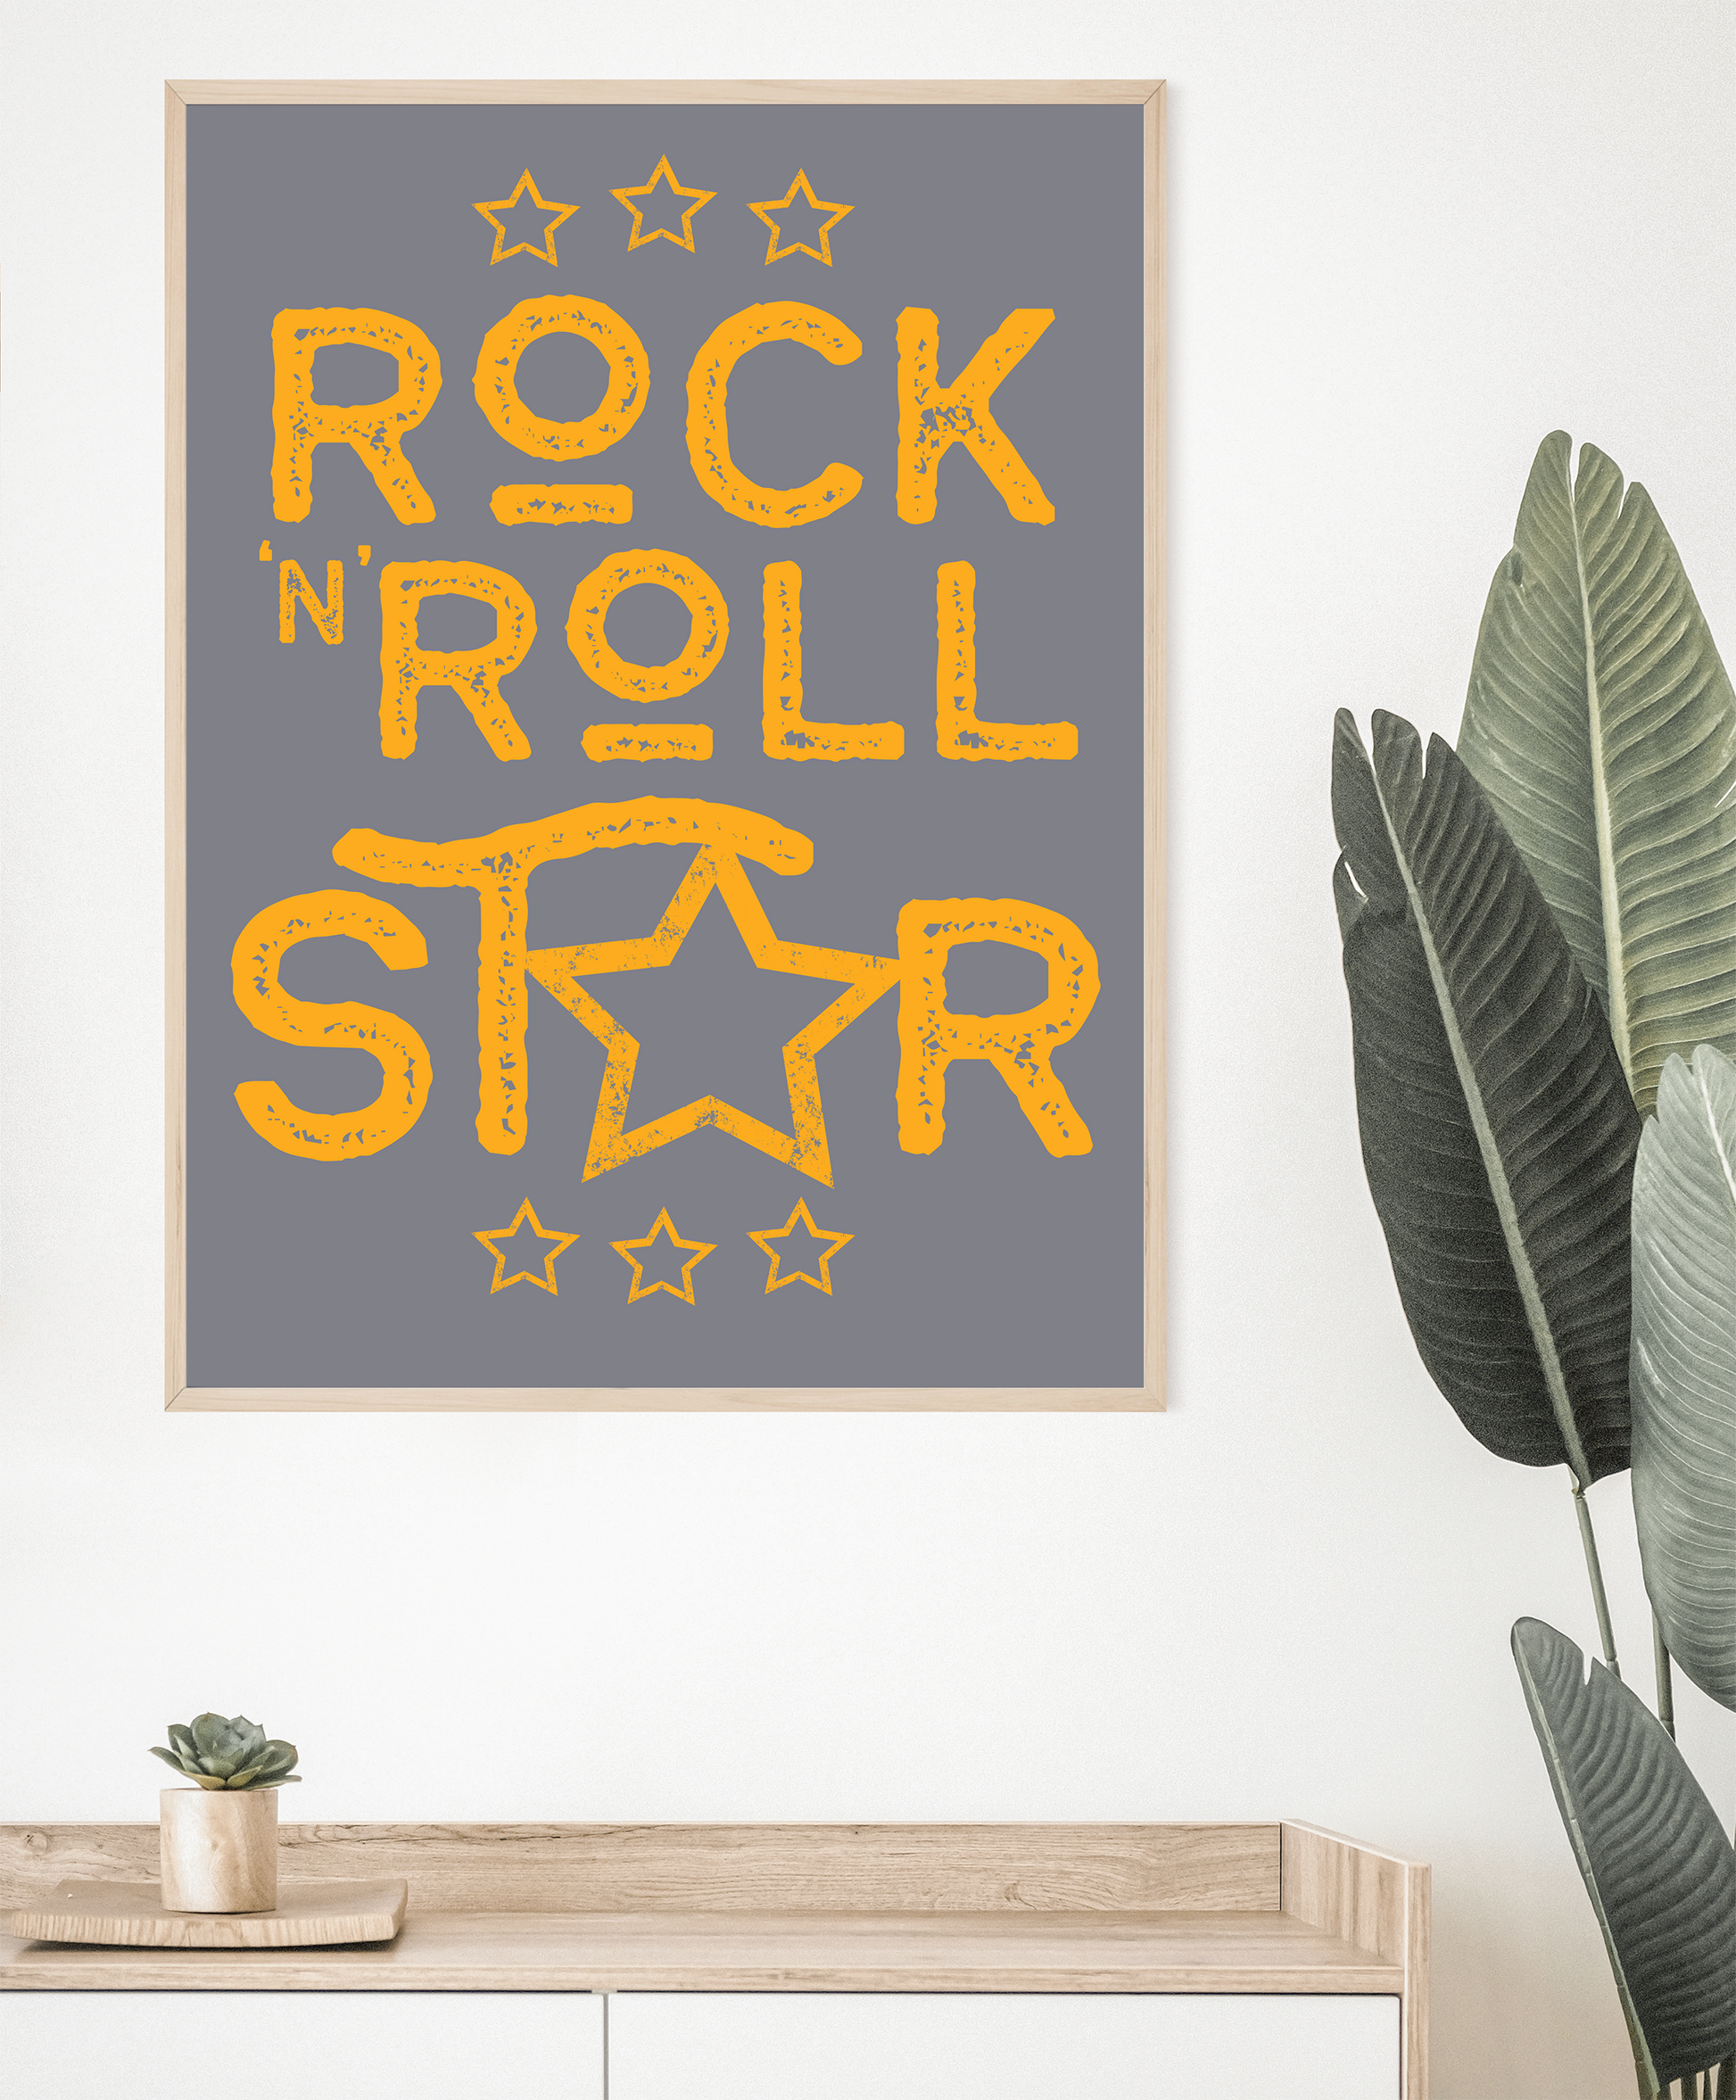 Oasis Wall Art Poster Print Rock and Roll Star framed on wall